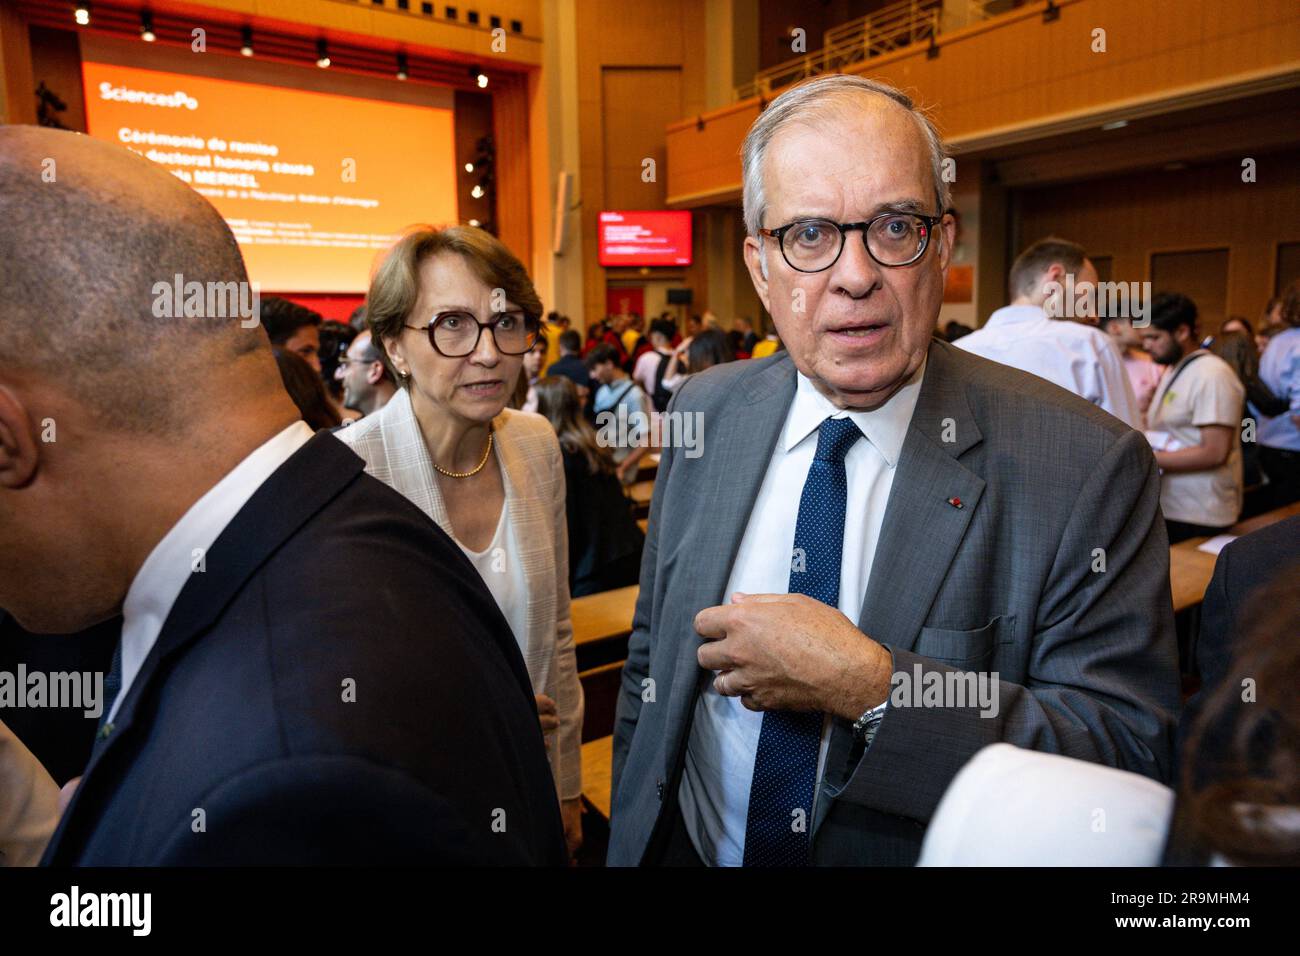 Paris, France. 27th June, 2023. French diplomat Maurice Gourdault-Montagne attends honorary doctorate ceremony at Sciences Po or Political Sciences Institute in Paris, France, on June 27, 2023. Photo by Ammar Abd Rabbo/ABACAPRESS.COM Credit: Abaca Press/Alamy Live News Stock Photo